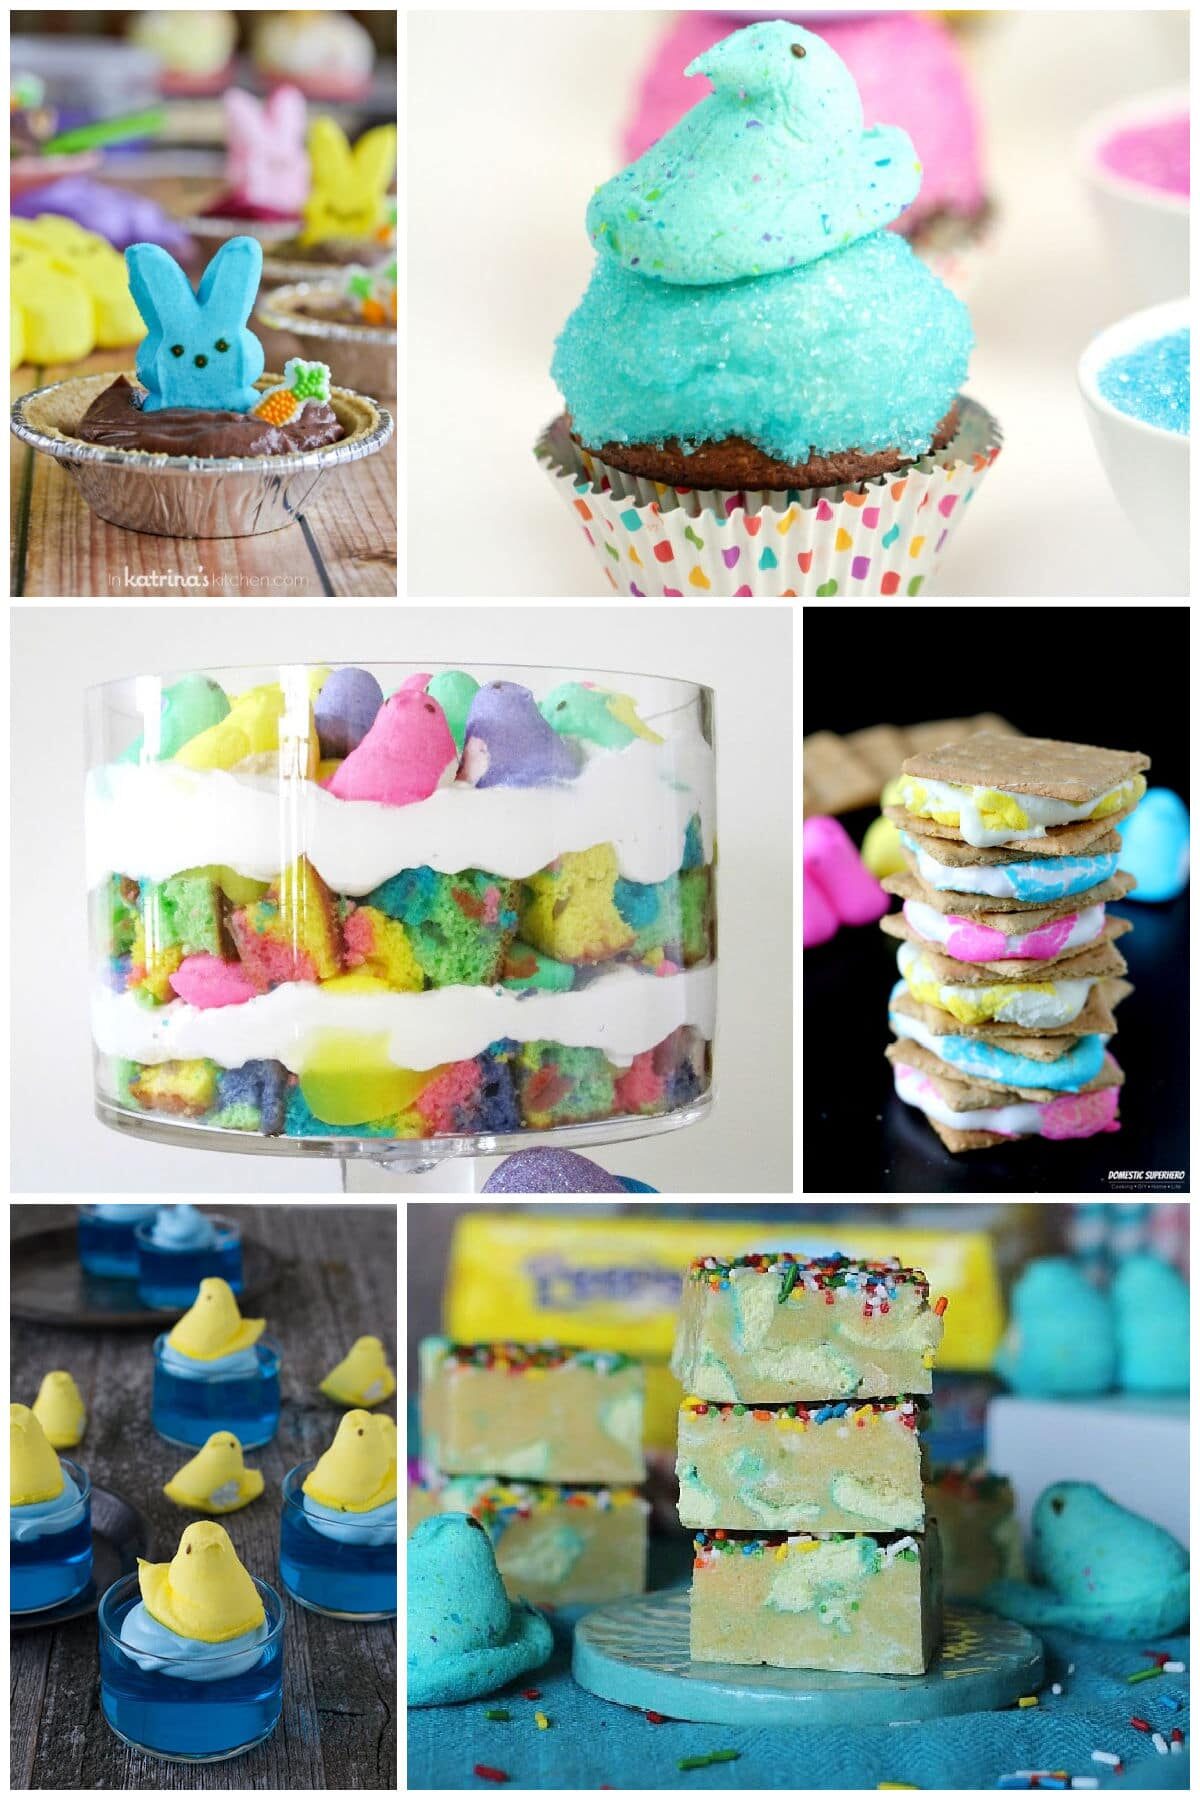 A collection of recipes made with peeps including s'mores, cupcakes and trifles.